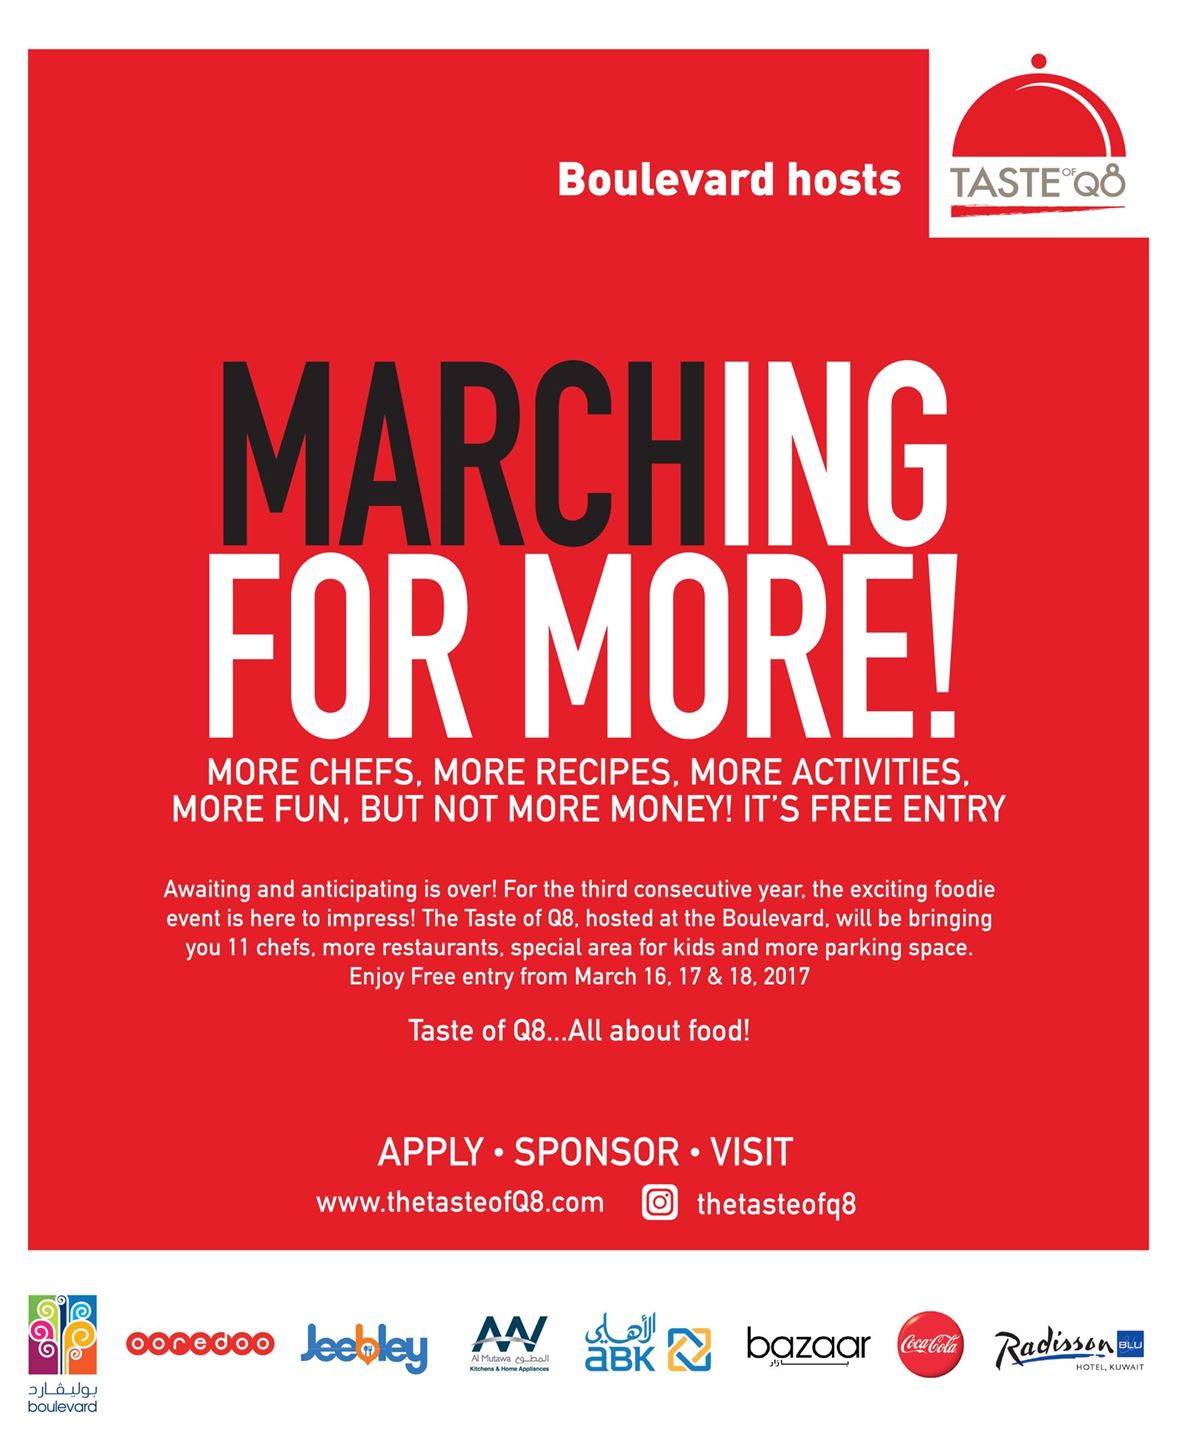 "Marching For More!".. Taste of Q8 hosted at the Boulevard